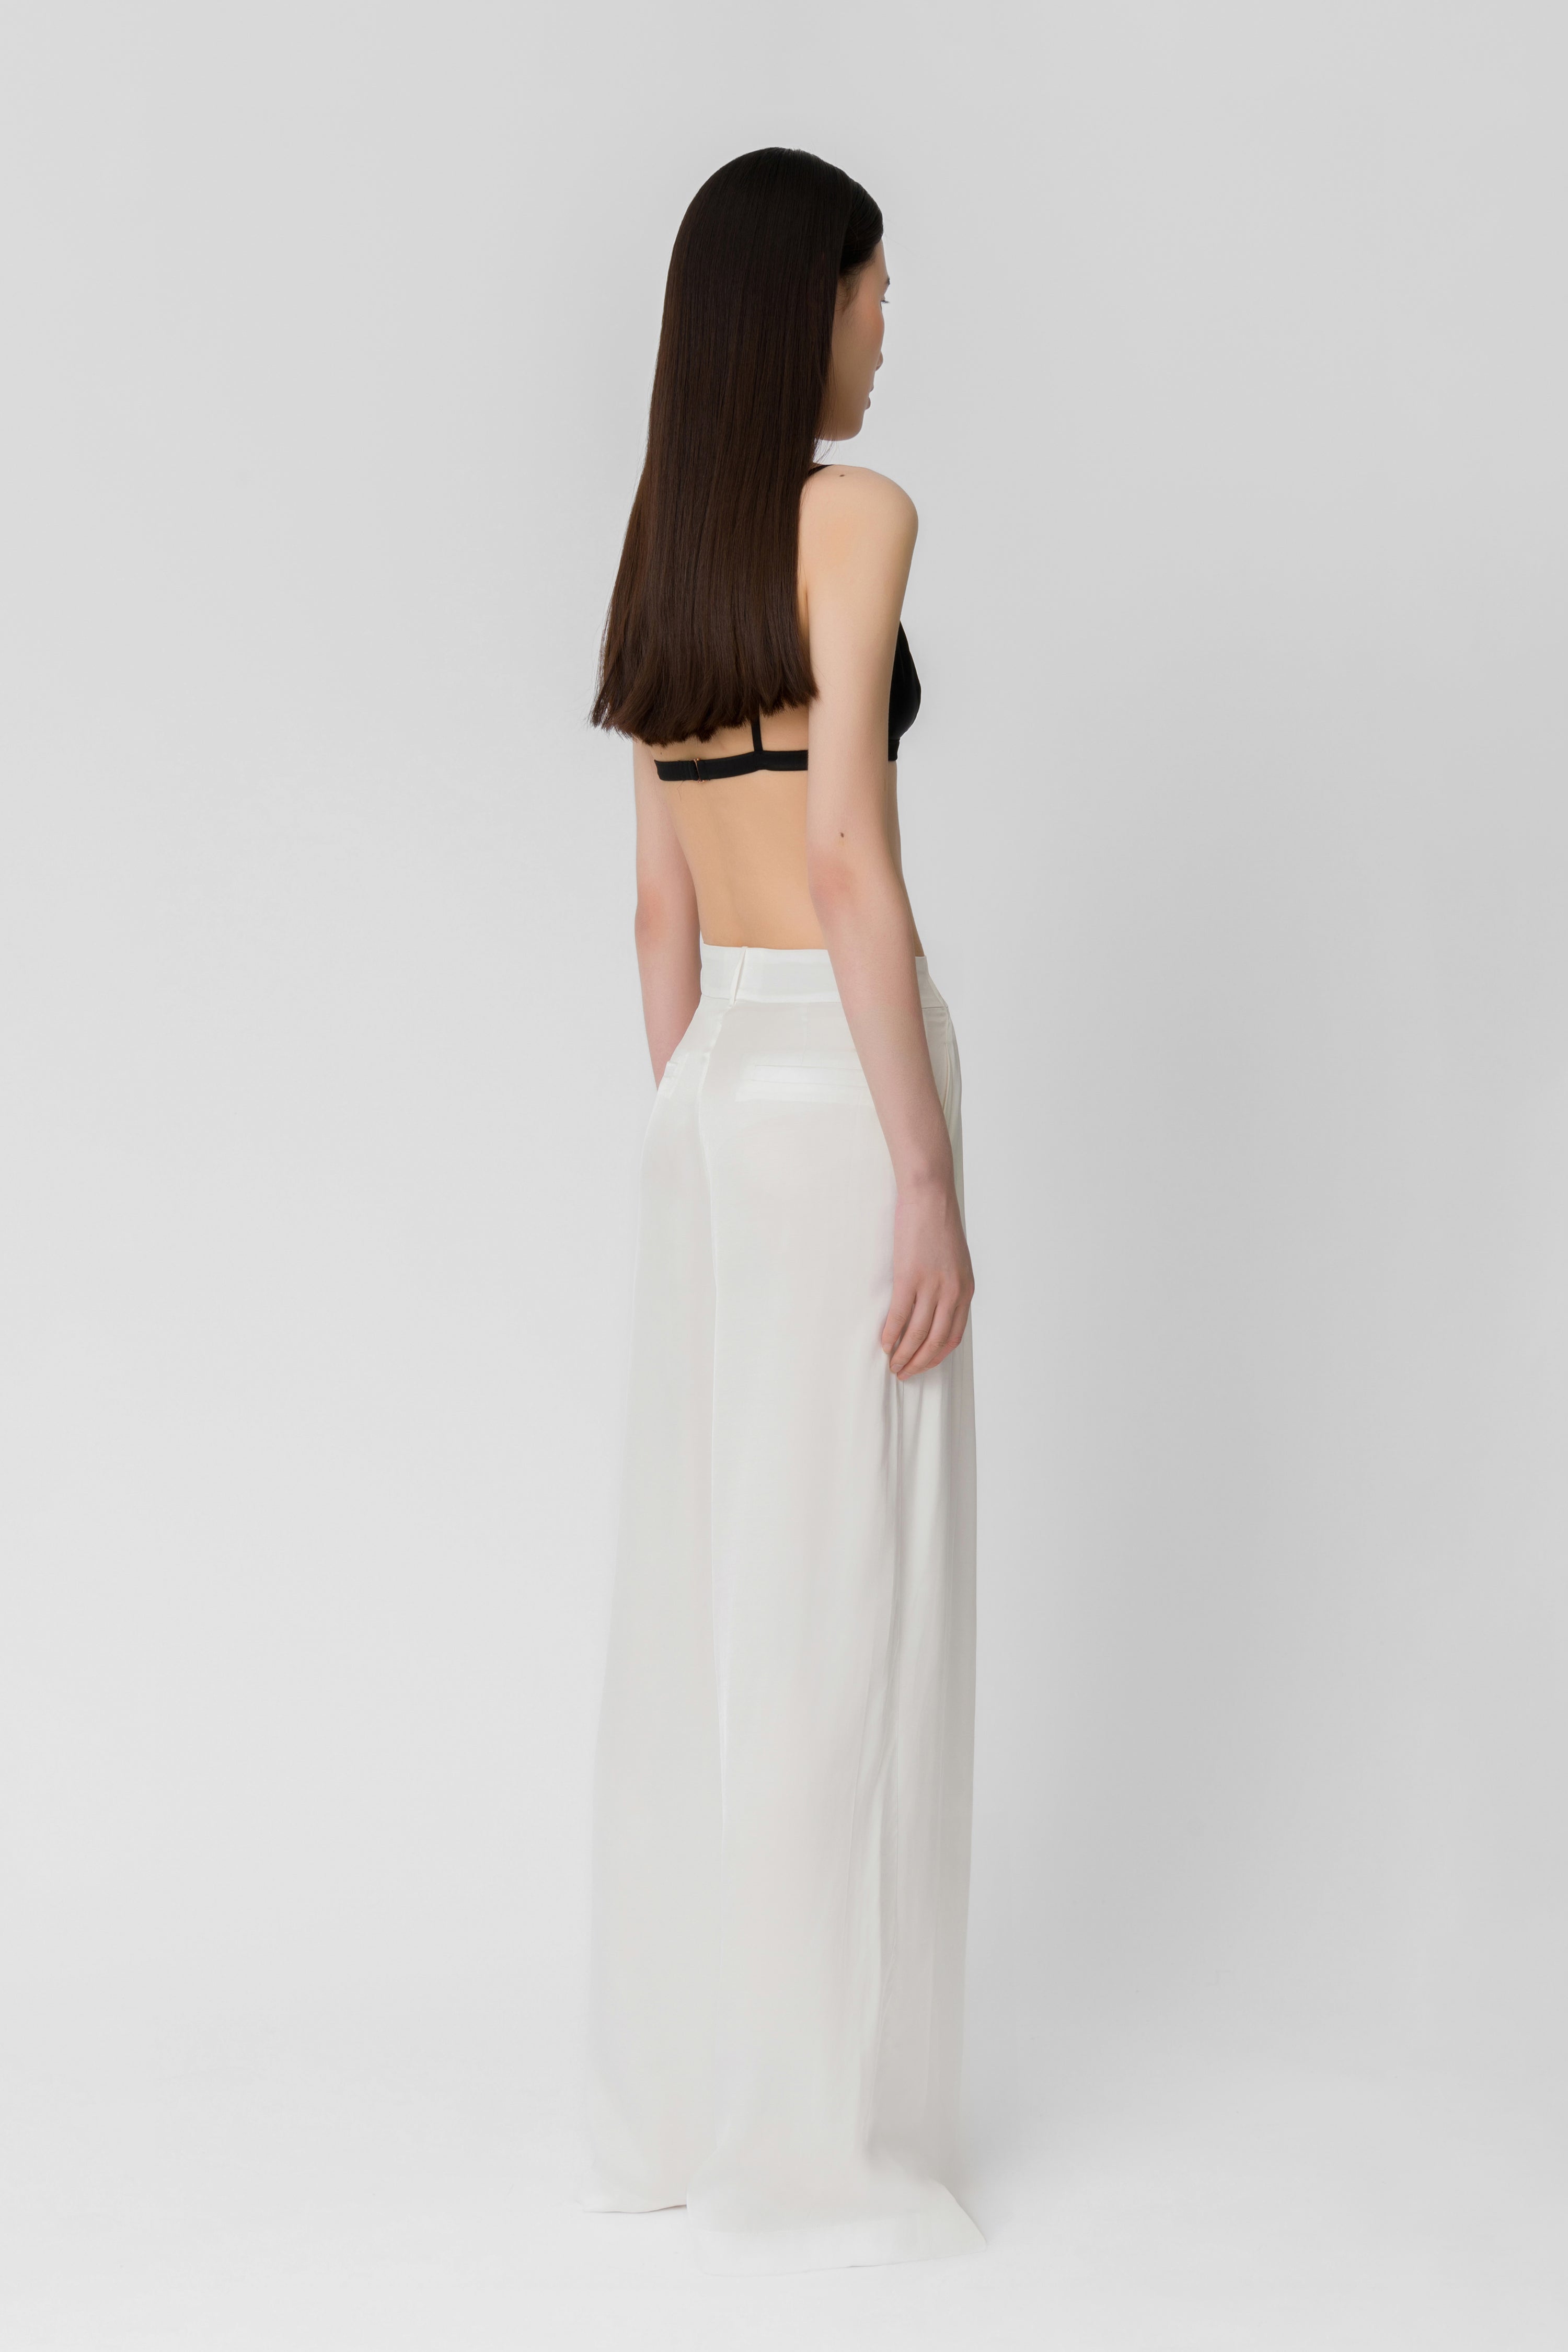 The Off White Satin Gabrielle Pant